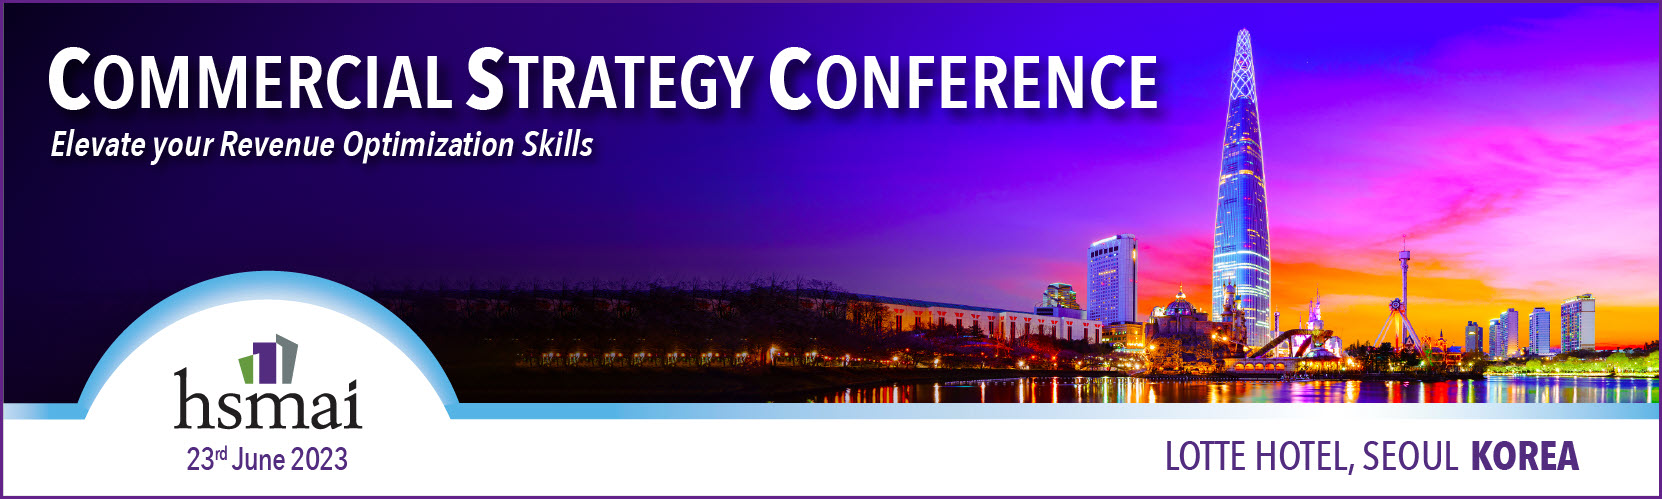 HSMAI Commercial Strategy Conference – Seoul